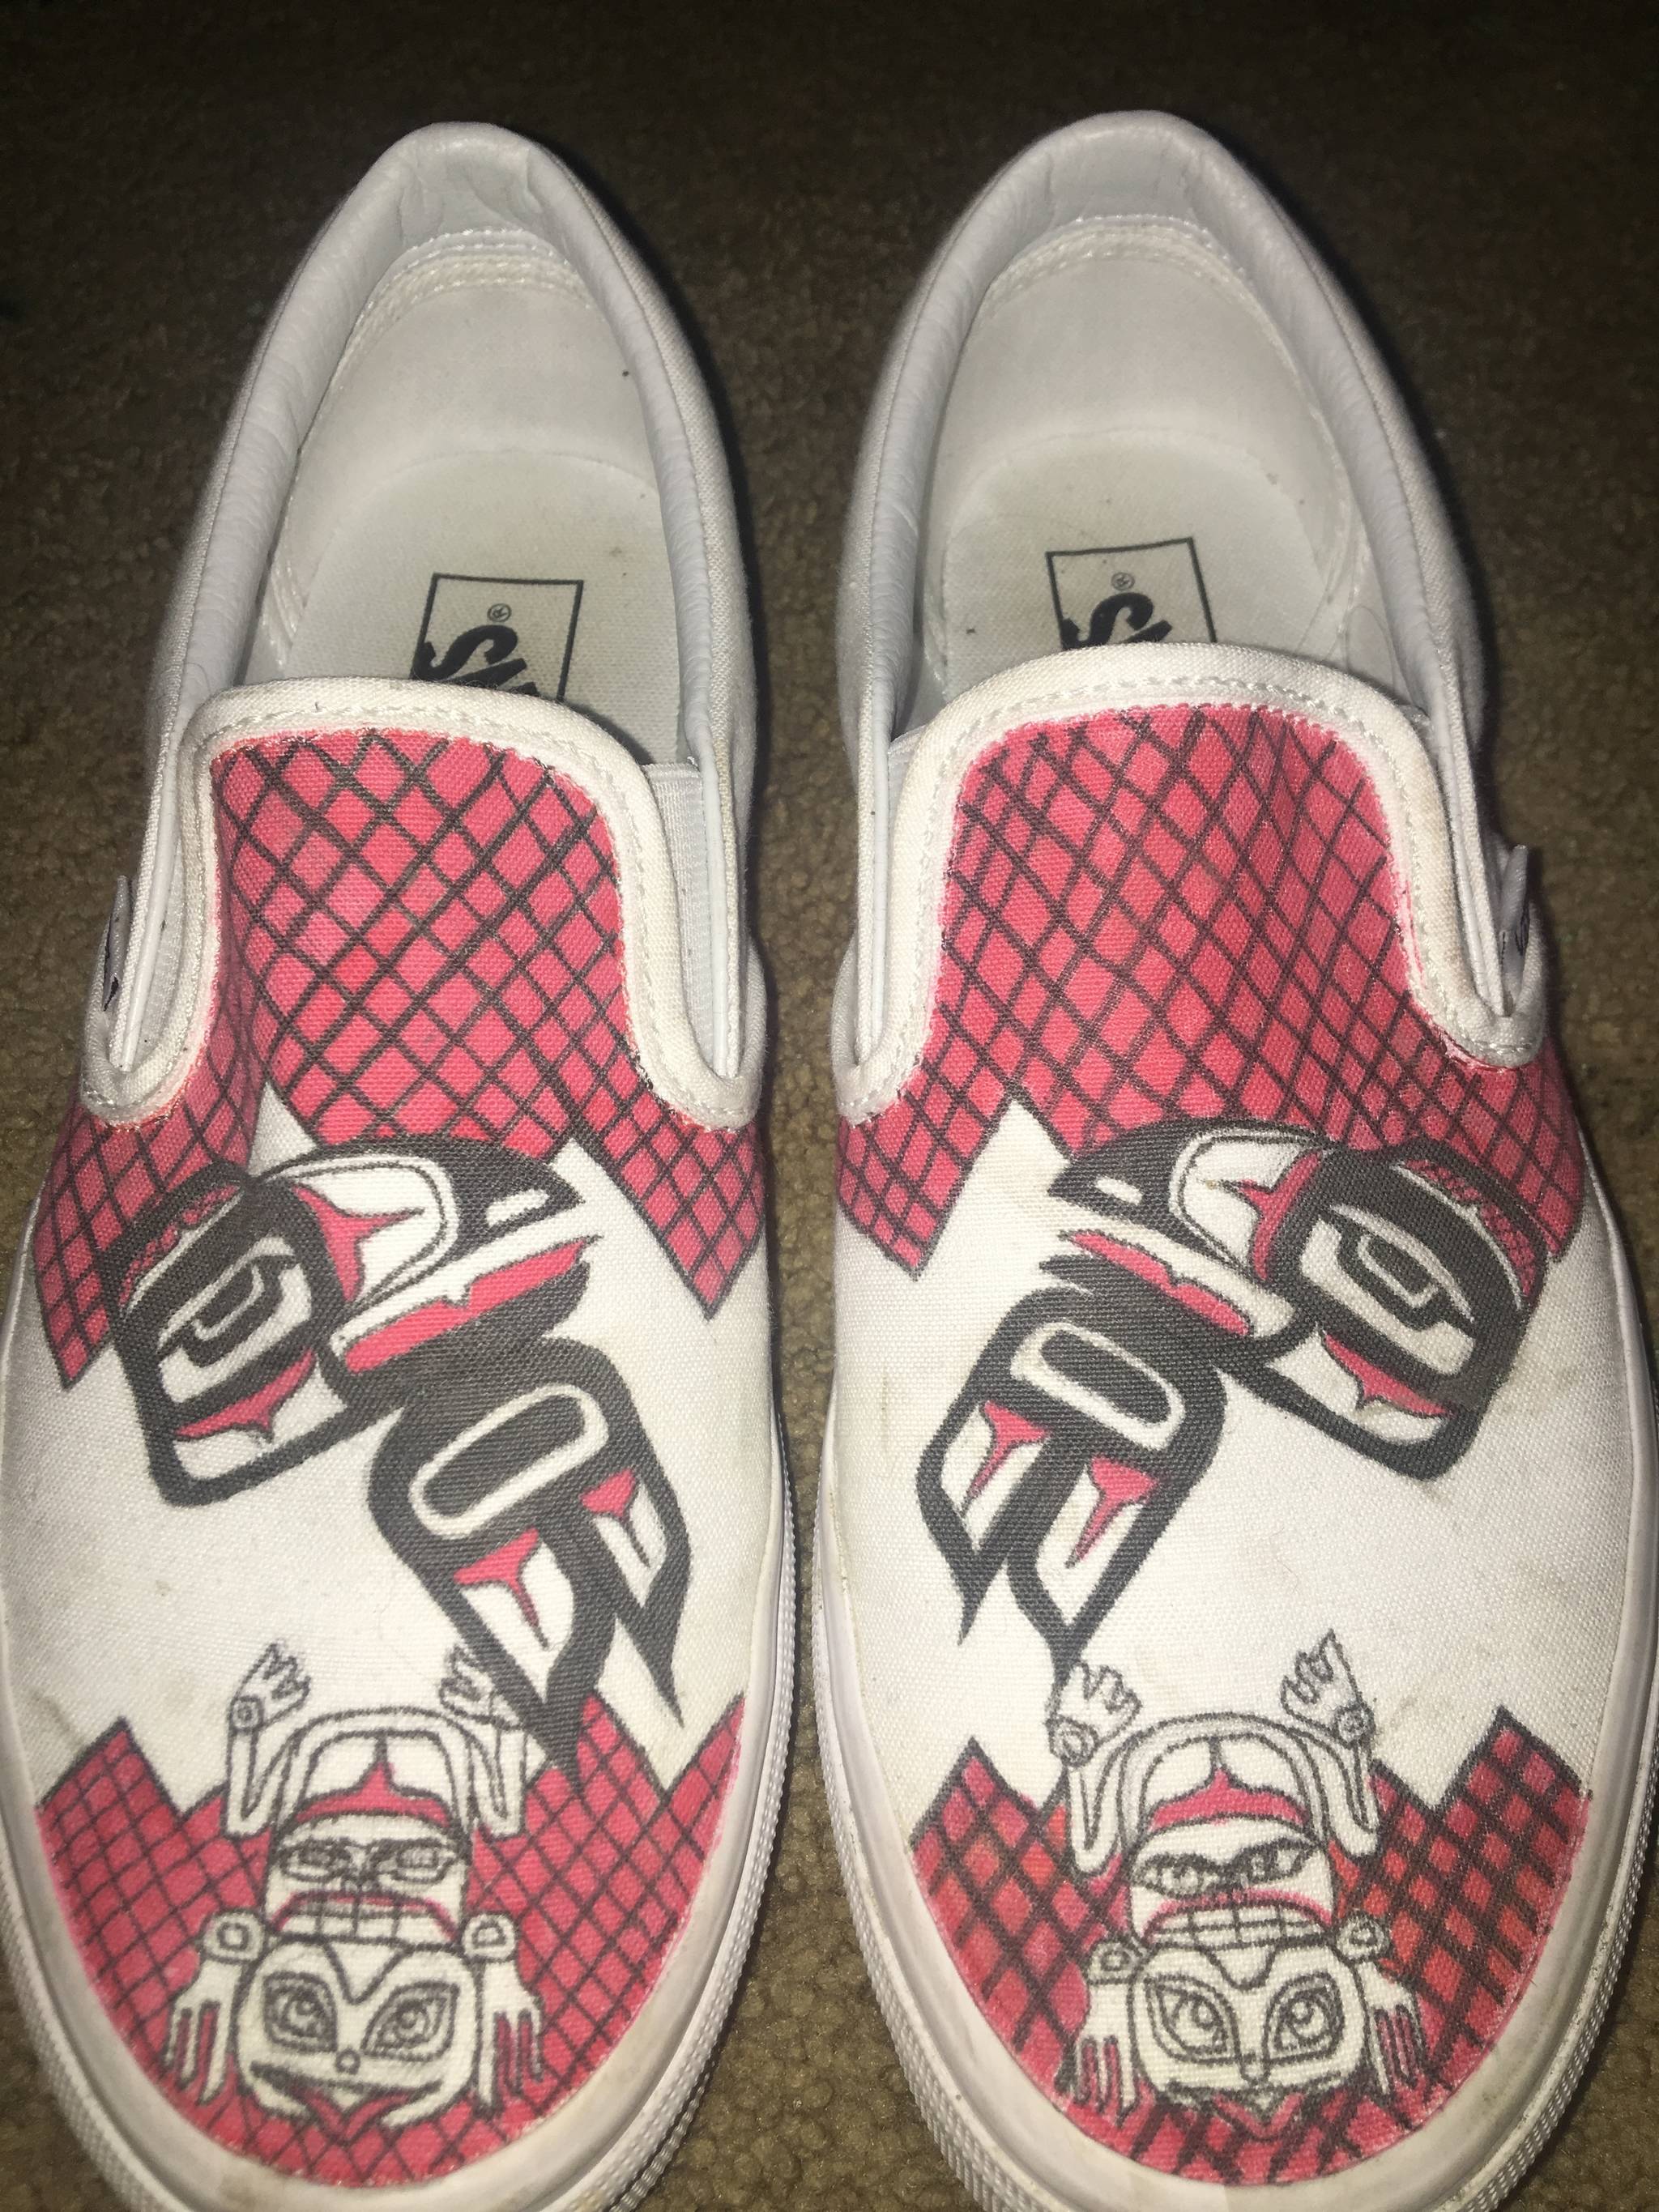 Sydney Johnson’s white Vans carry formline designs of a raven and a frog, representing her moiety and clan. (Courtesy Photo | Sydney Johnson)